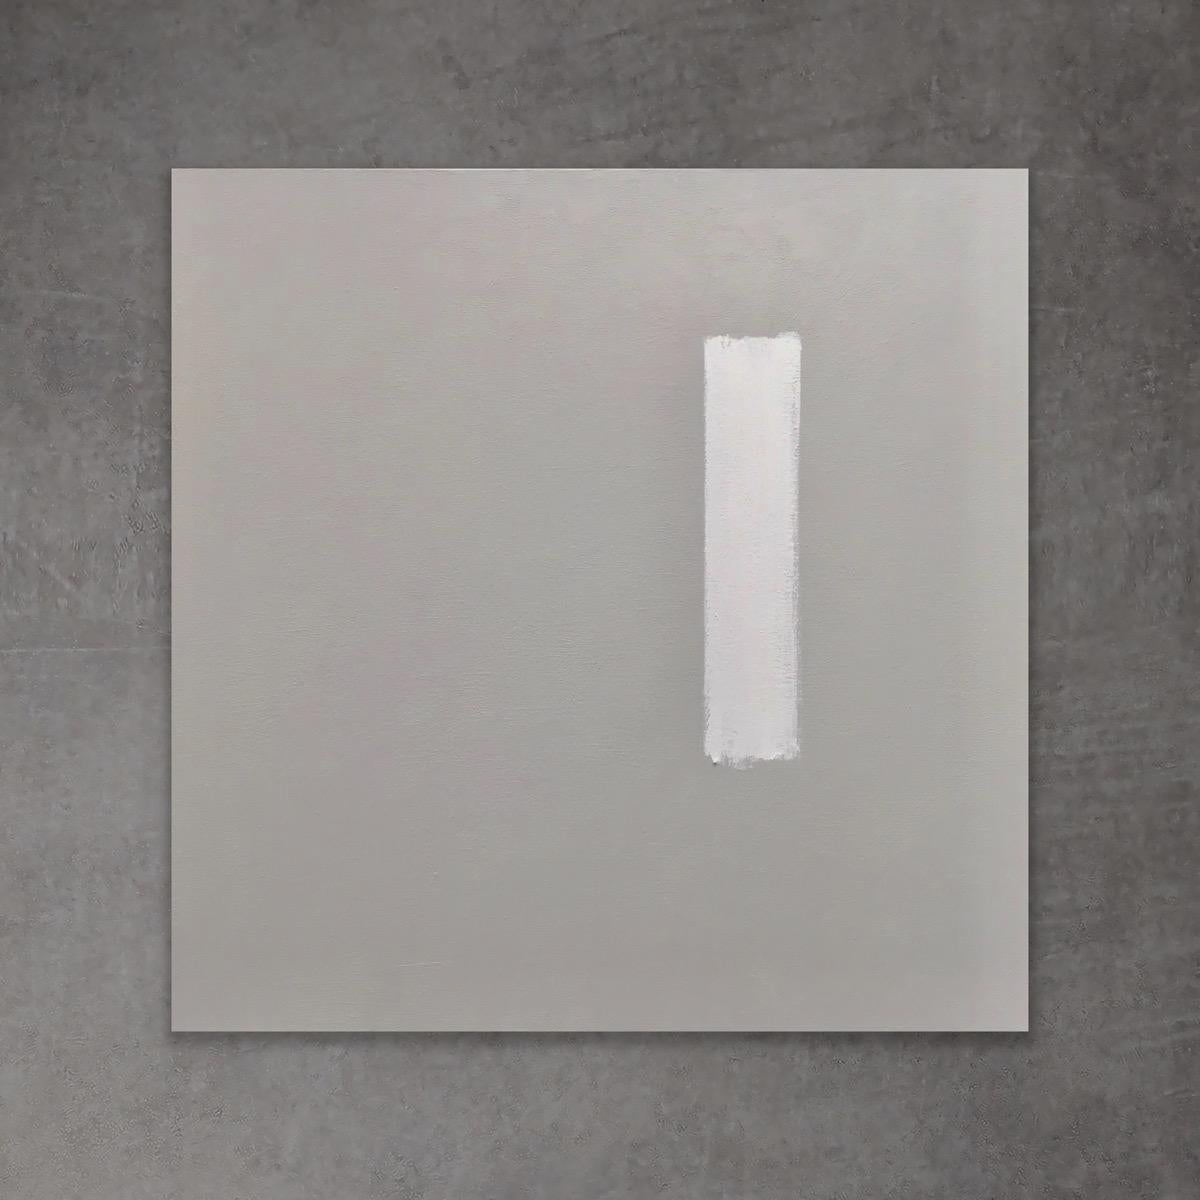 This Is Where I Draw The Line #4 (Grey, White, Minimal Abstract) - Art by Andrea Stajan-Ferkul